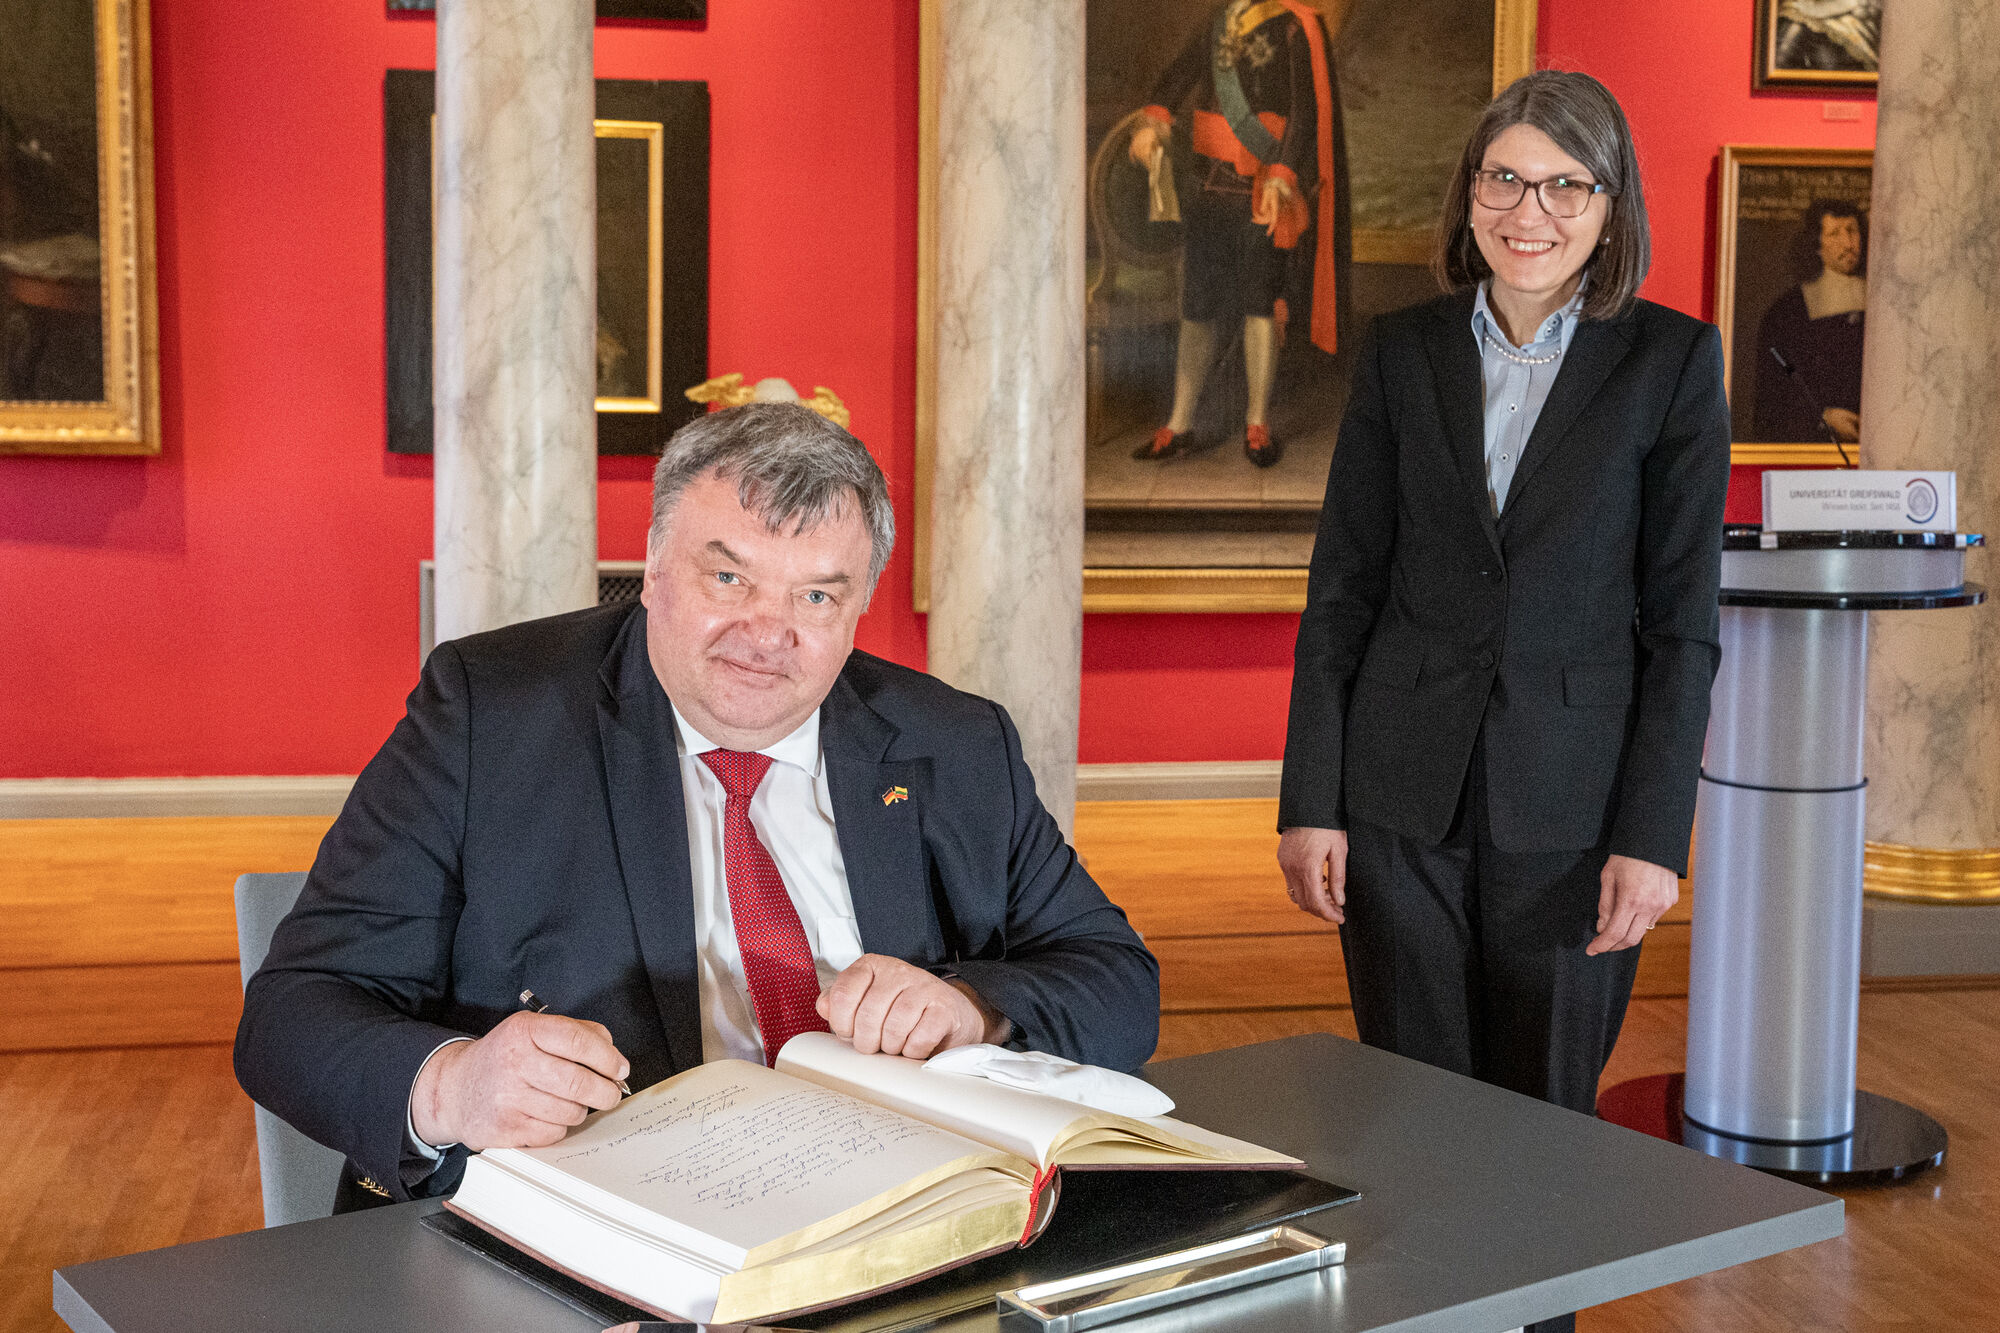 The Ambassador of Lithuania signing the university's guest book in the university's Aula.